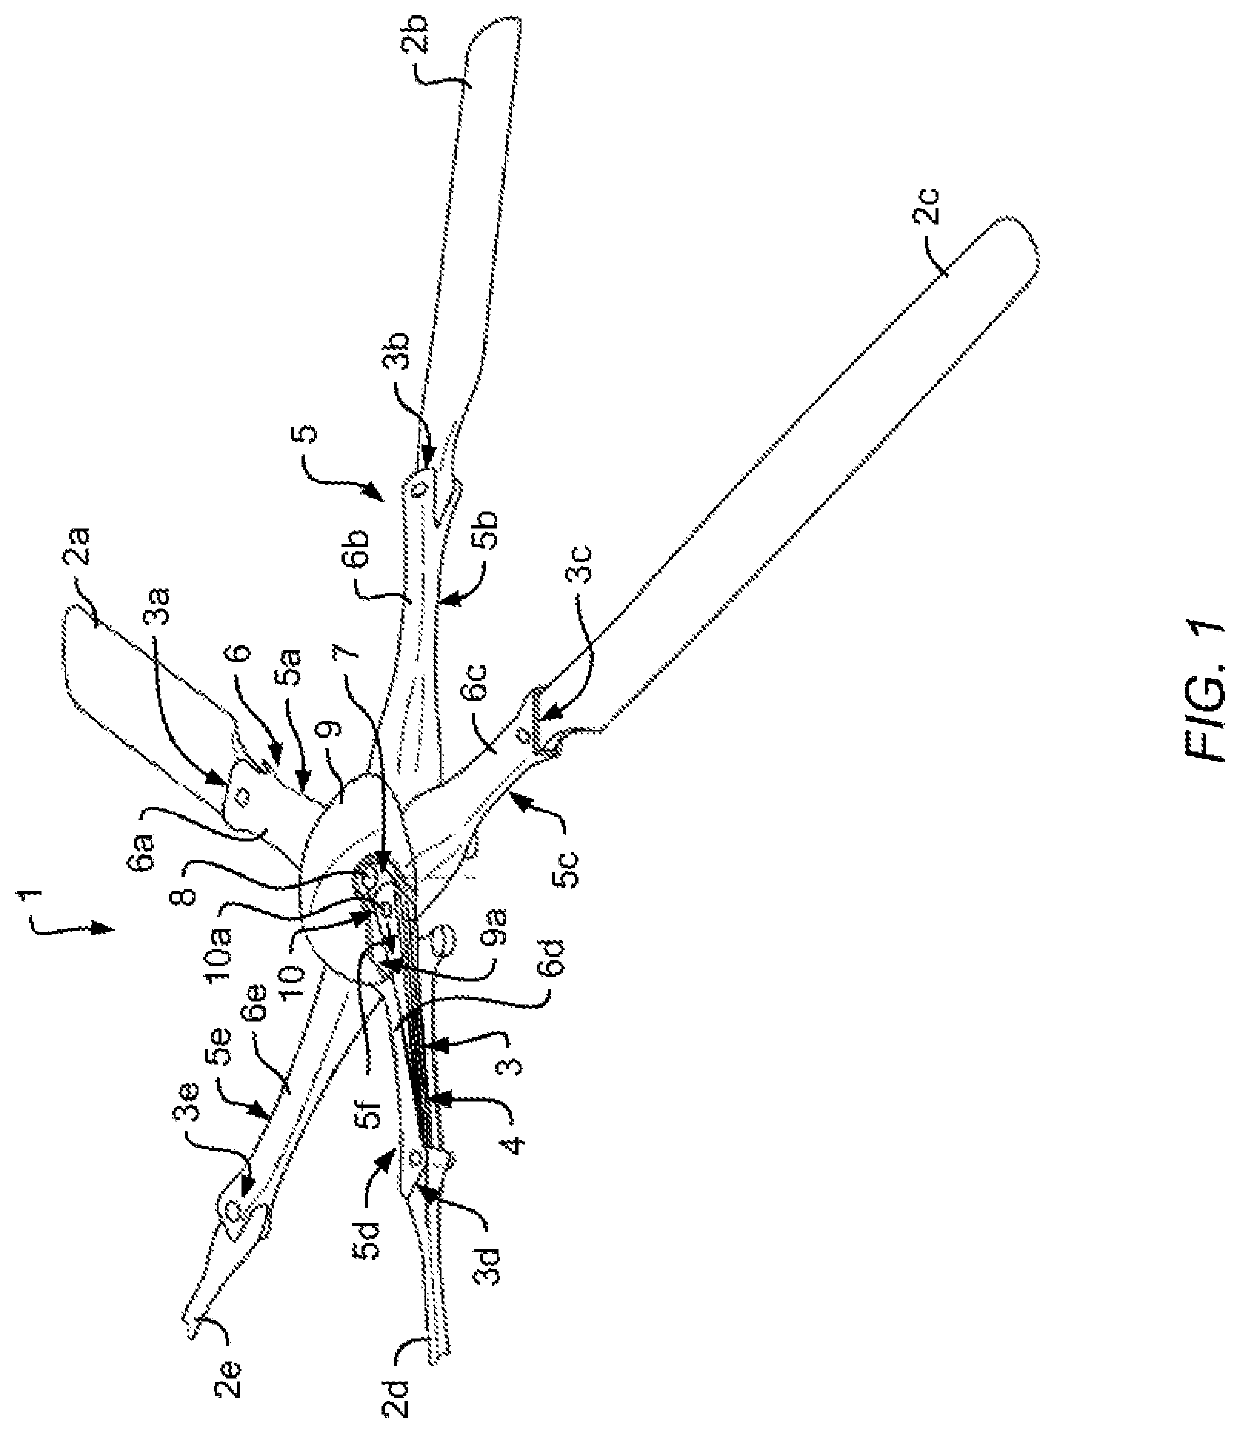 Elastic torsion element for connecting a rotor blade to a rotor hub of a rotor